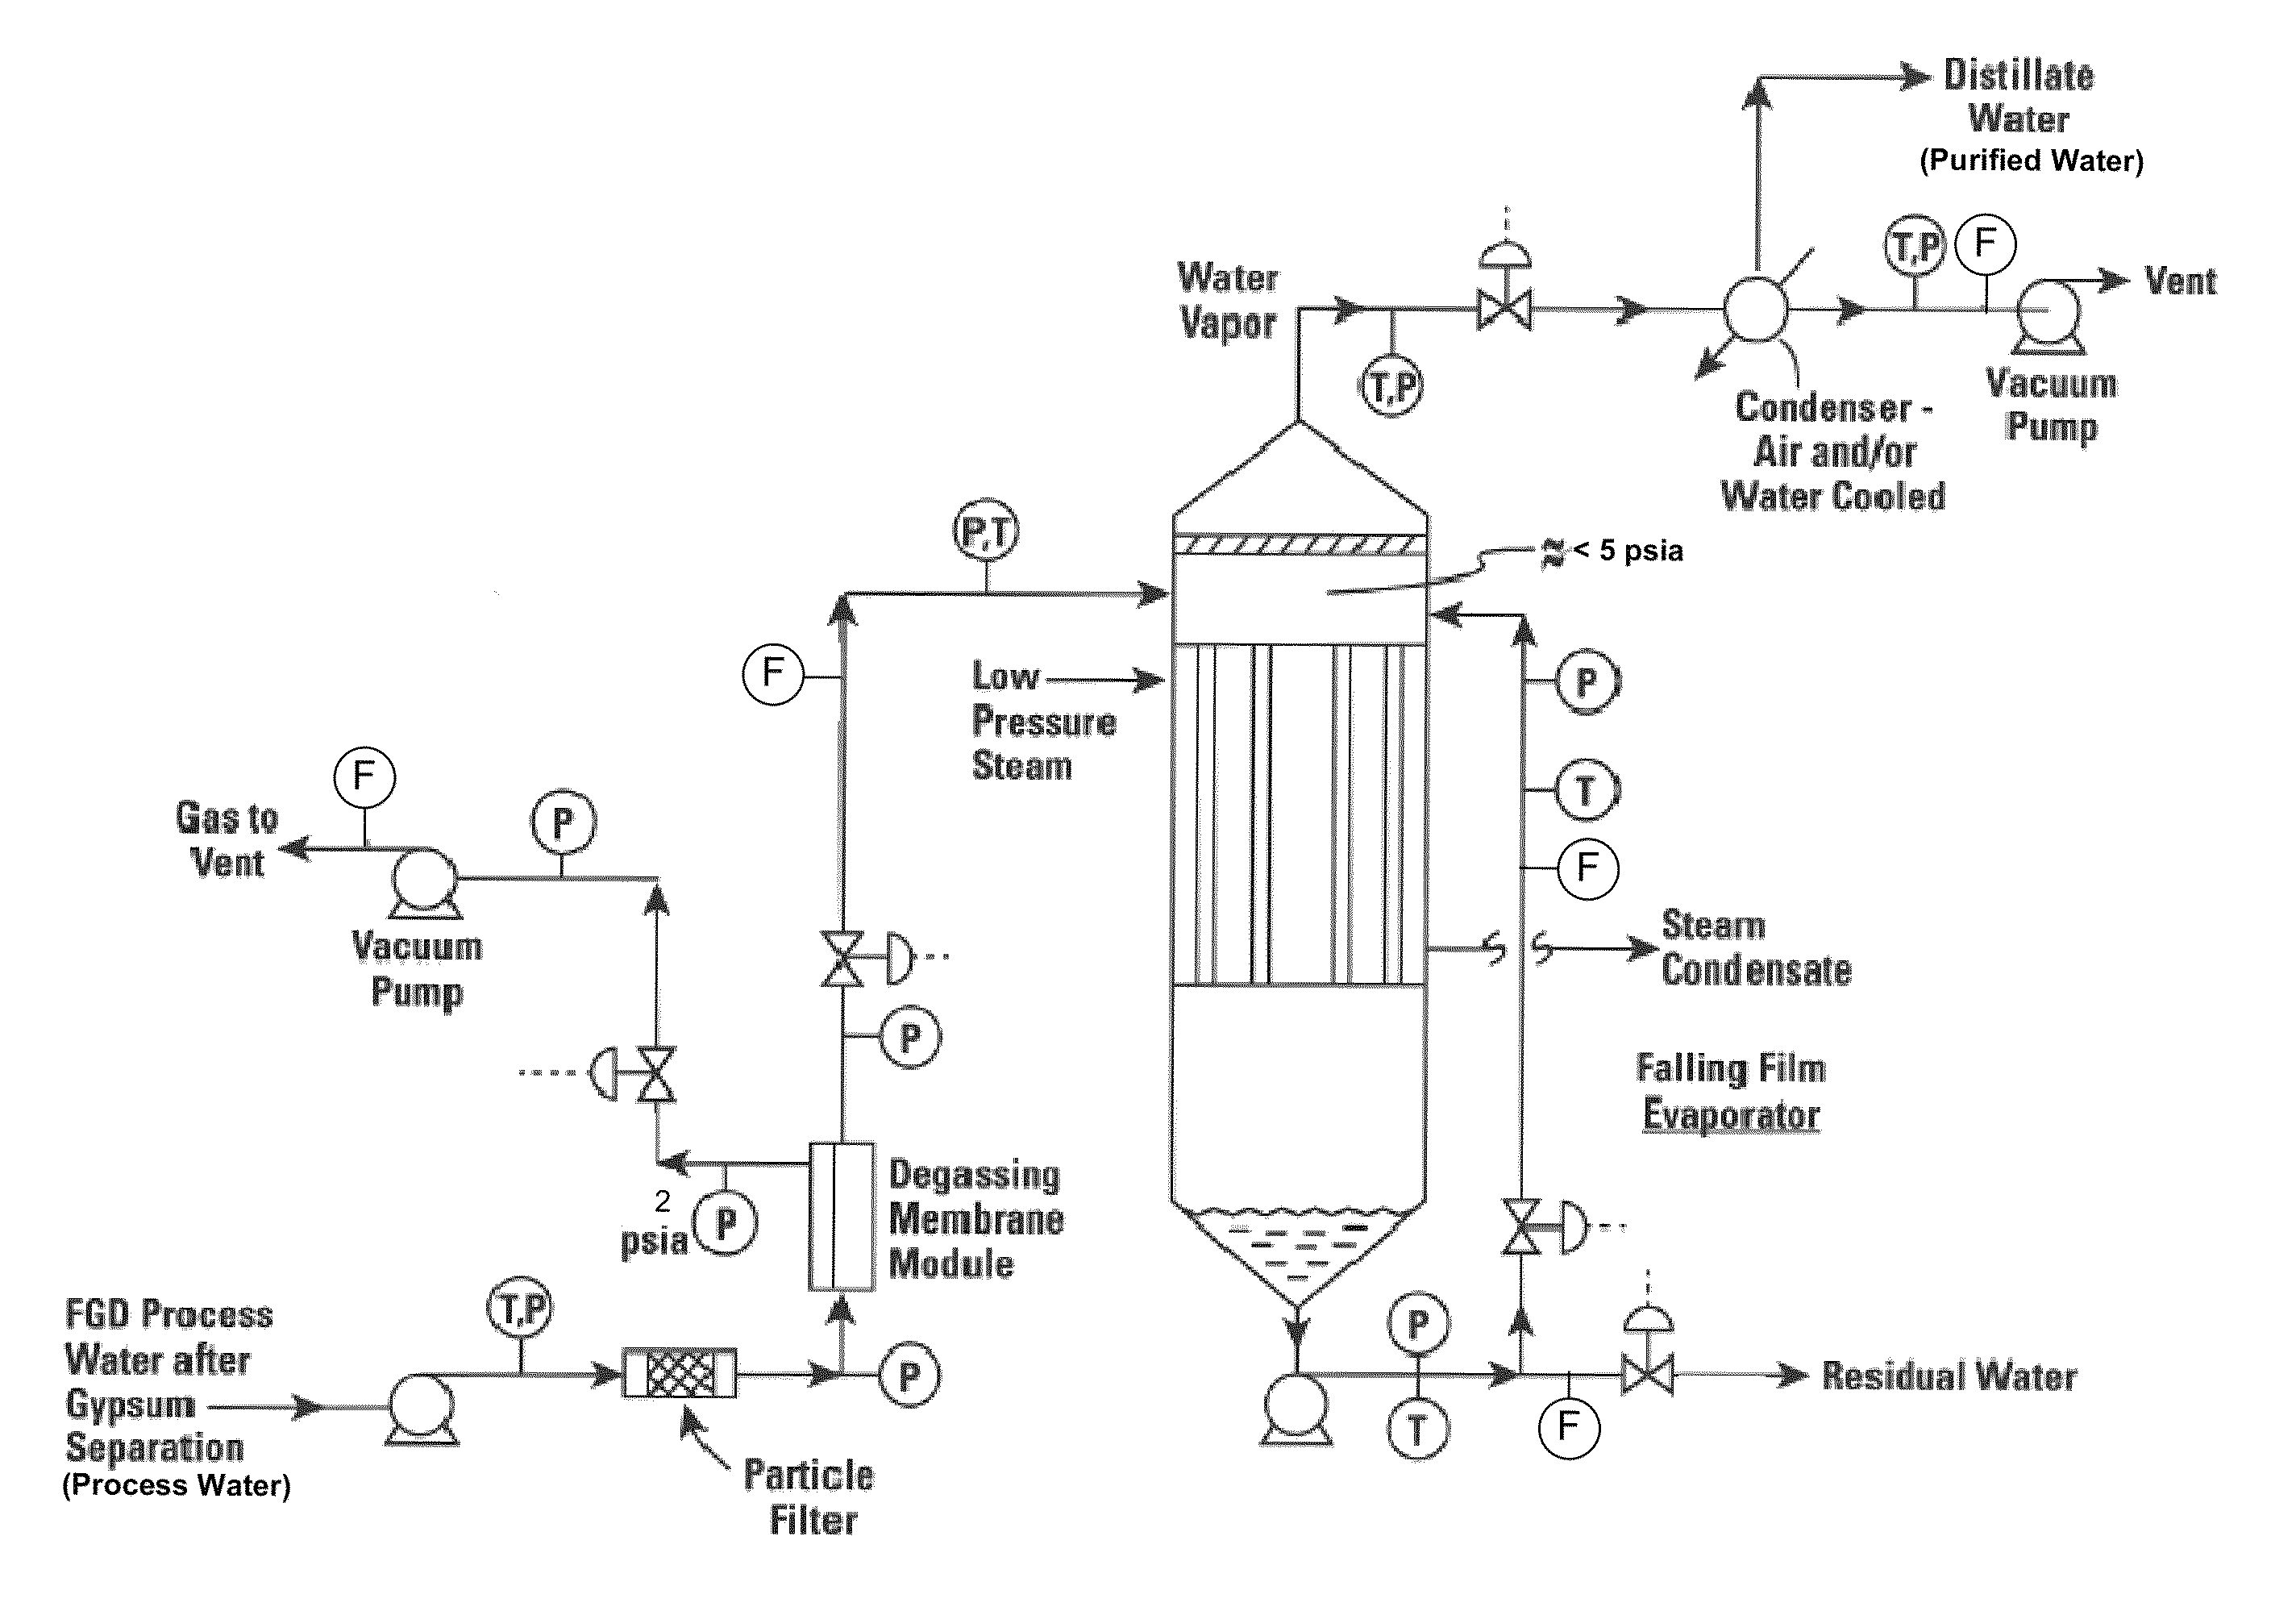 Systems and methods for purifying process water